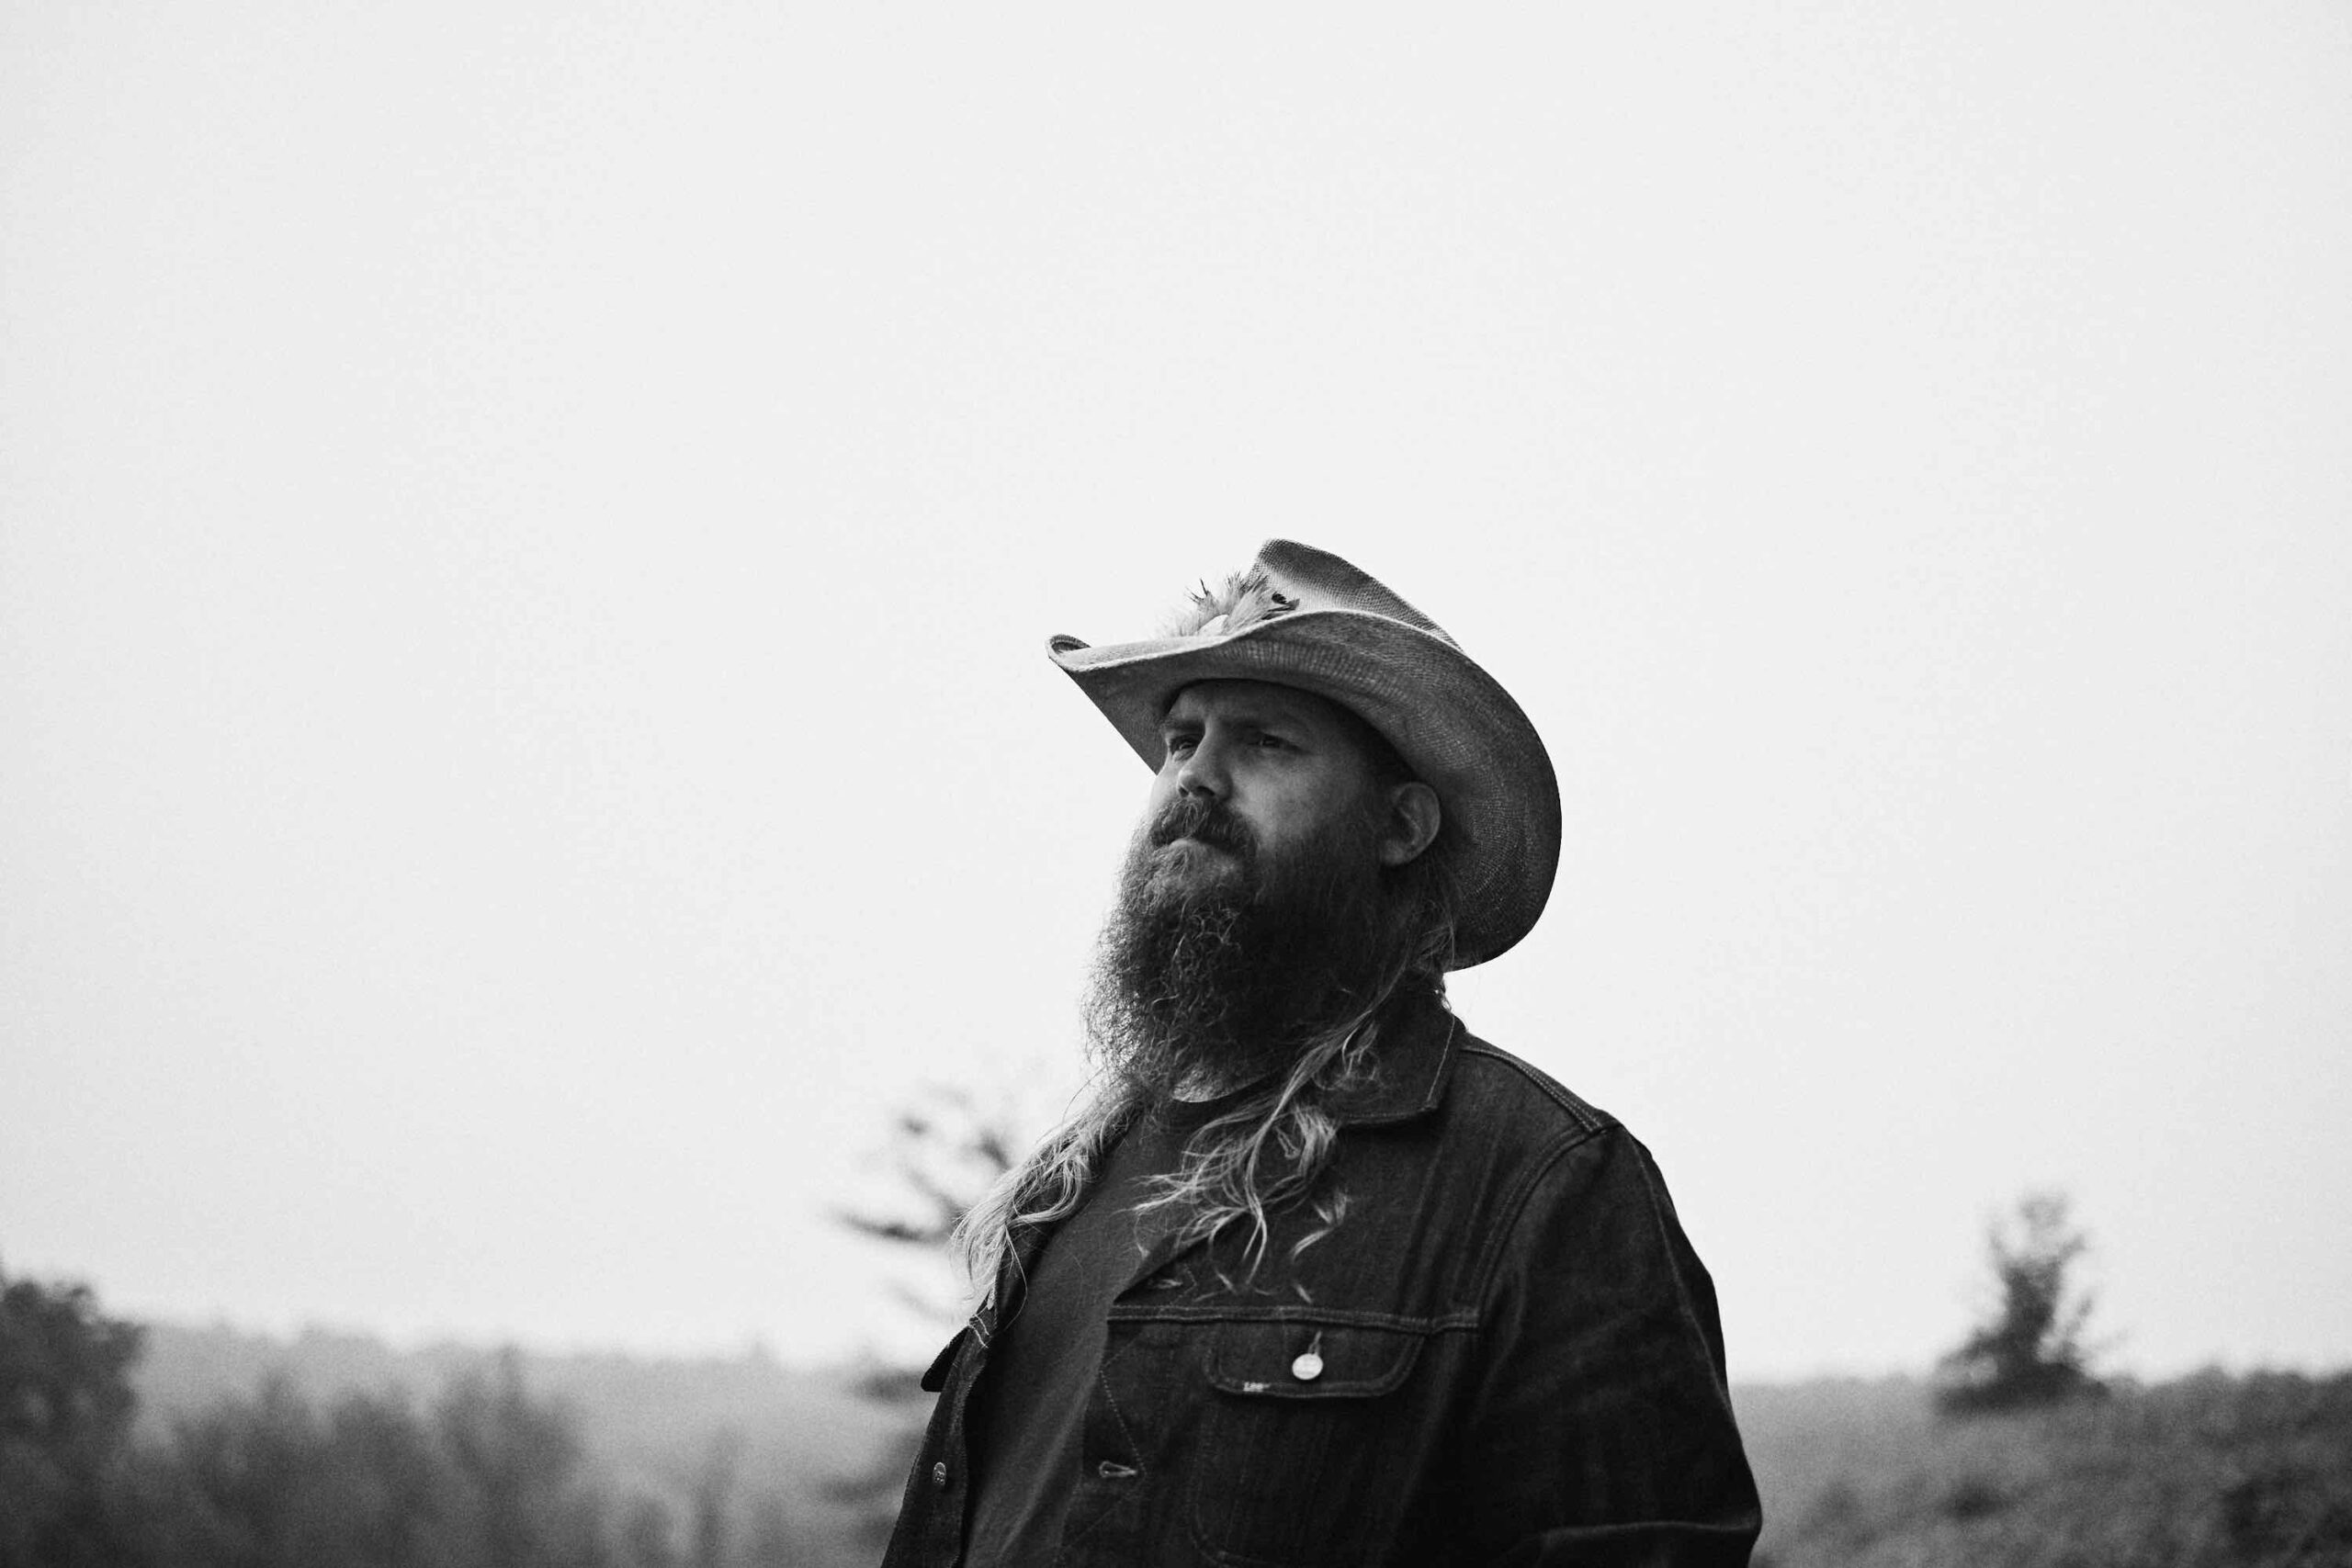 Chris Stapleton Reschedules And Extends ‘All-American Road Show’ Tour